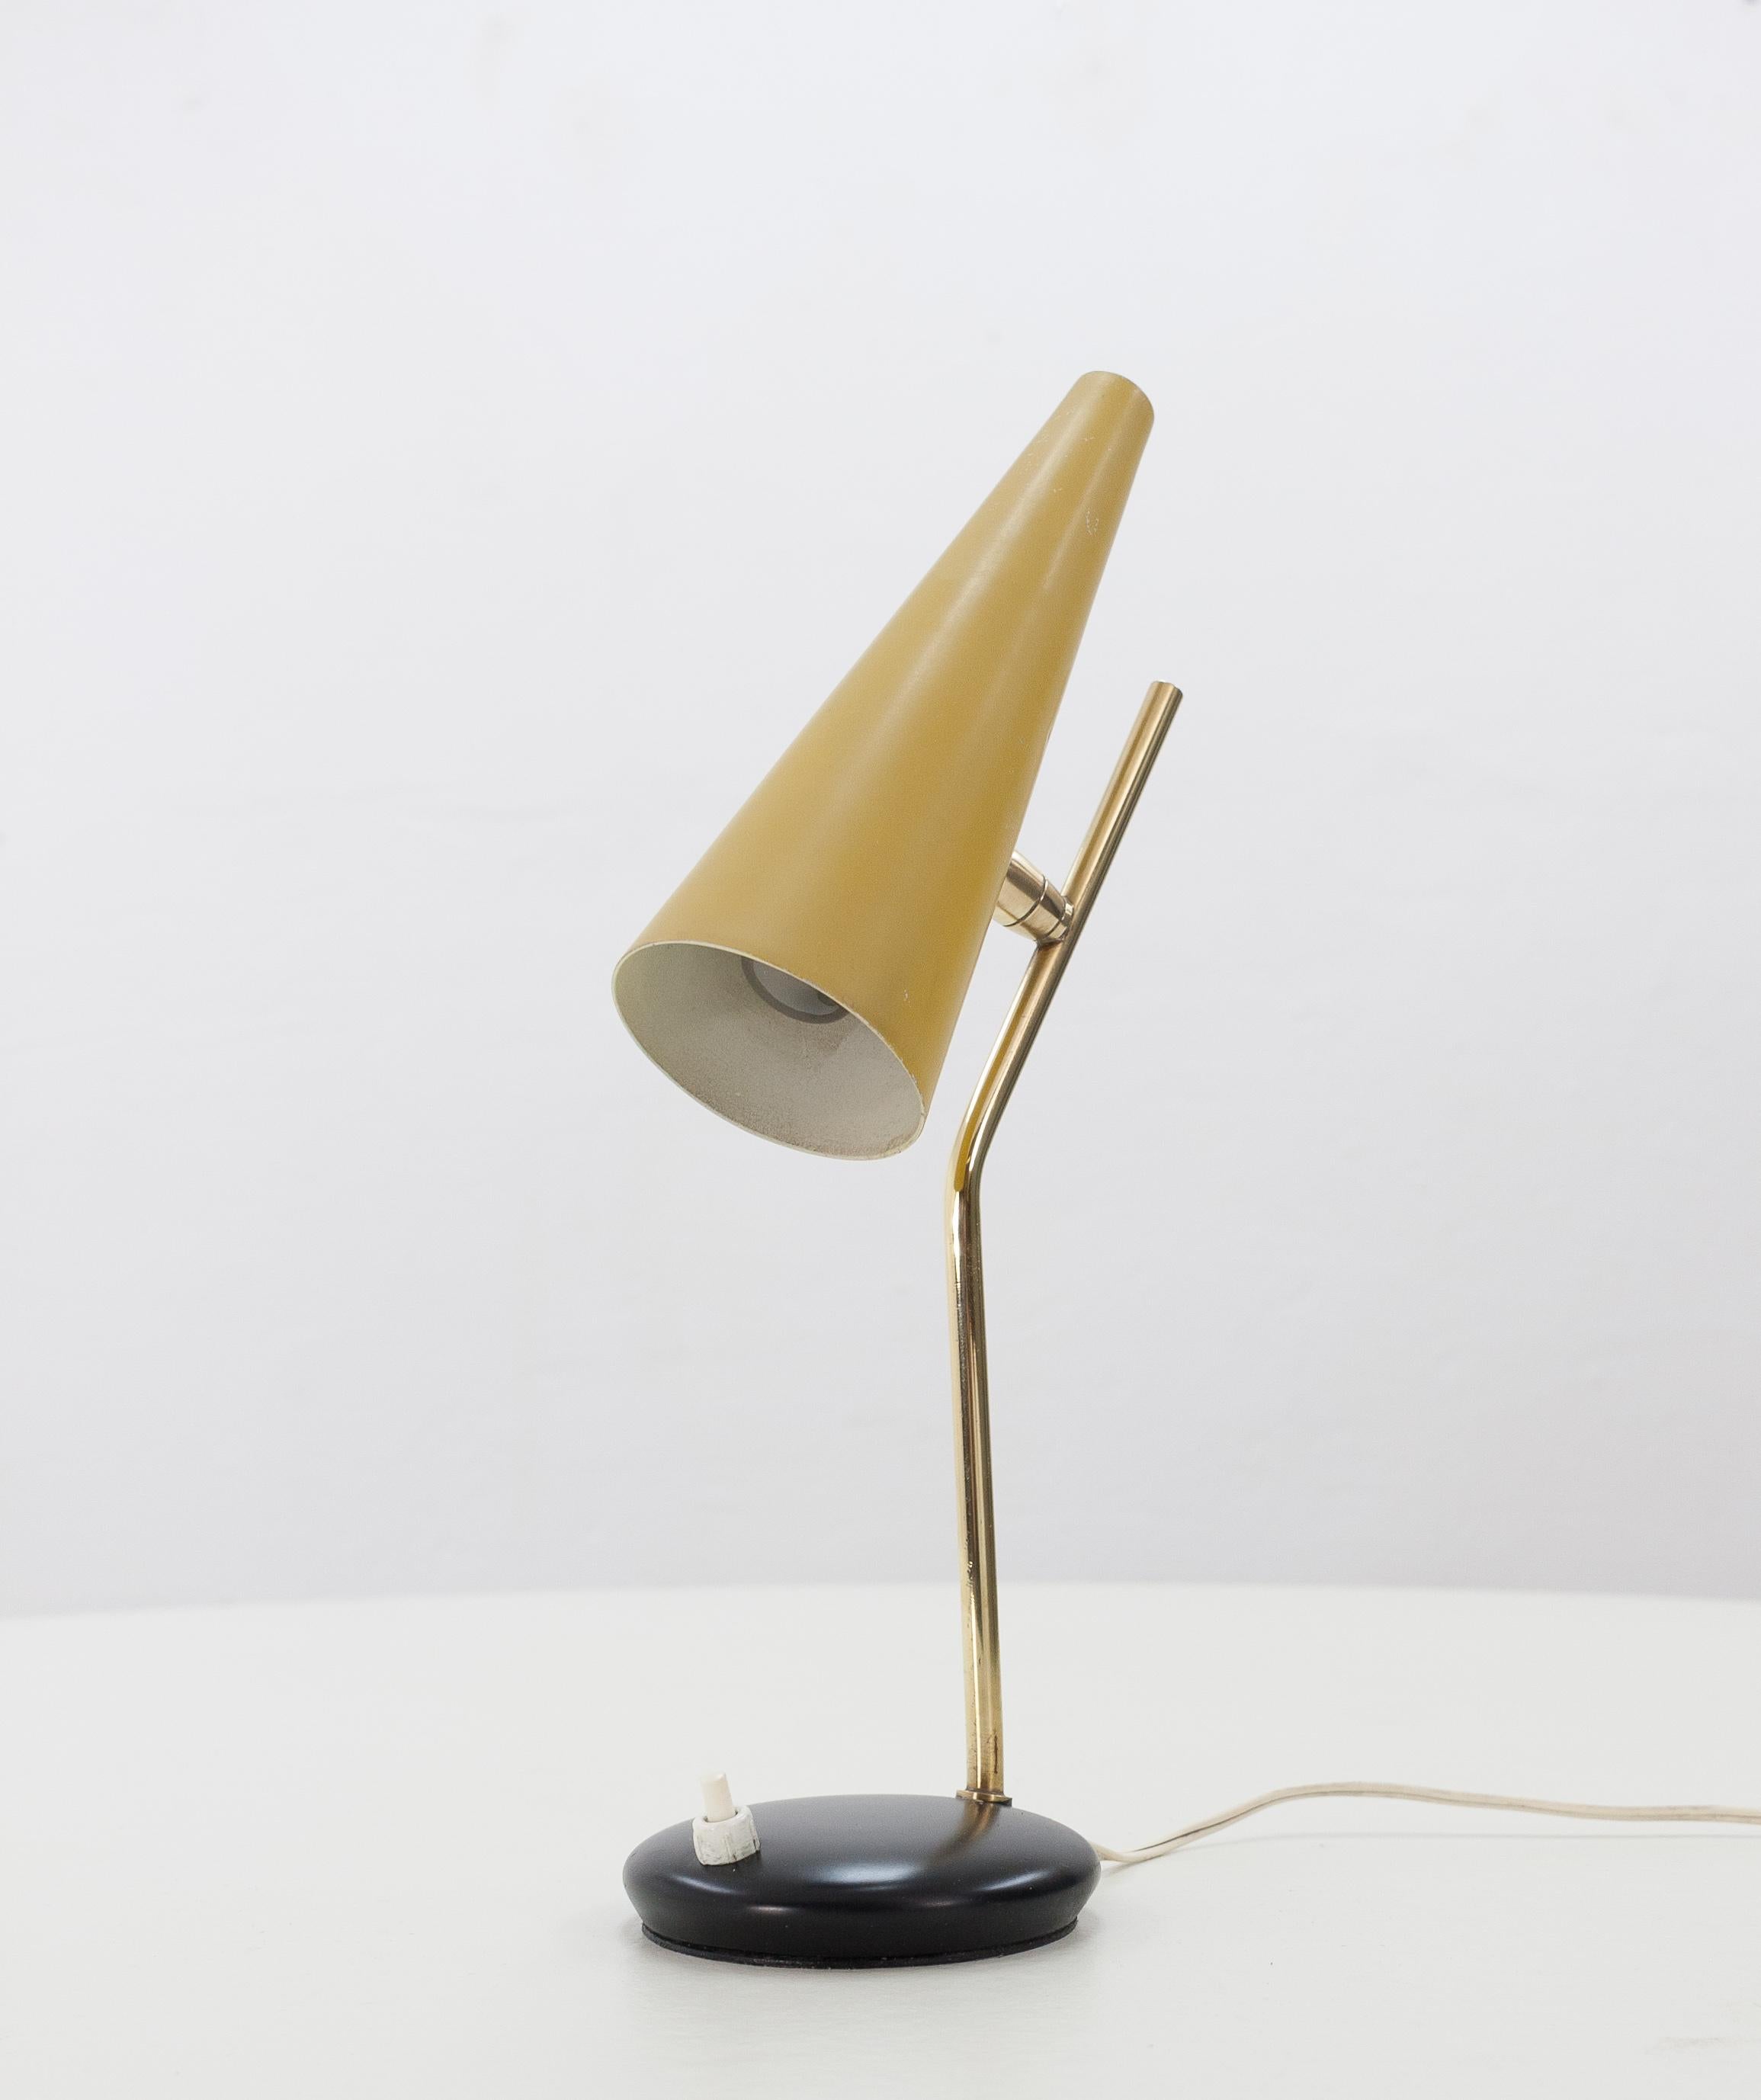 Lovely little desk lamp with a horn-shaped avocado colored lampshade. Attributed to Stilnovo, made in Italy.